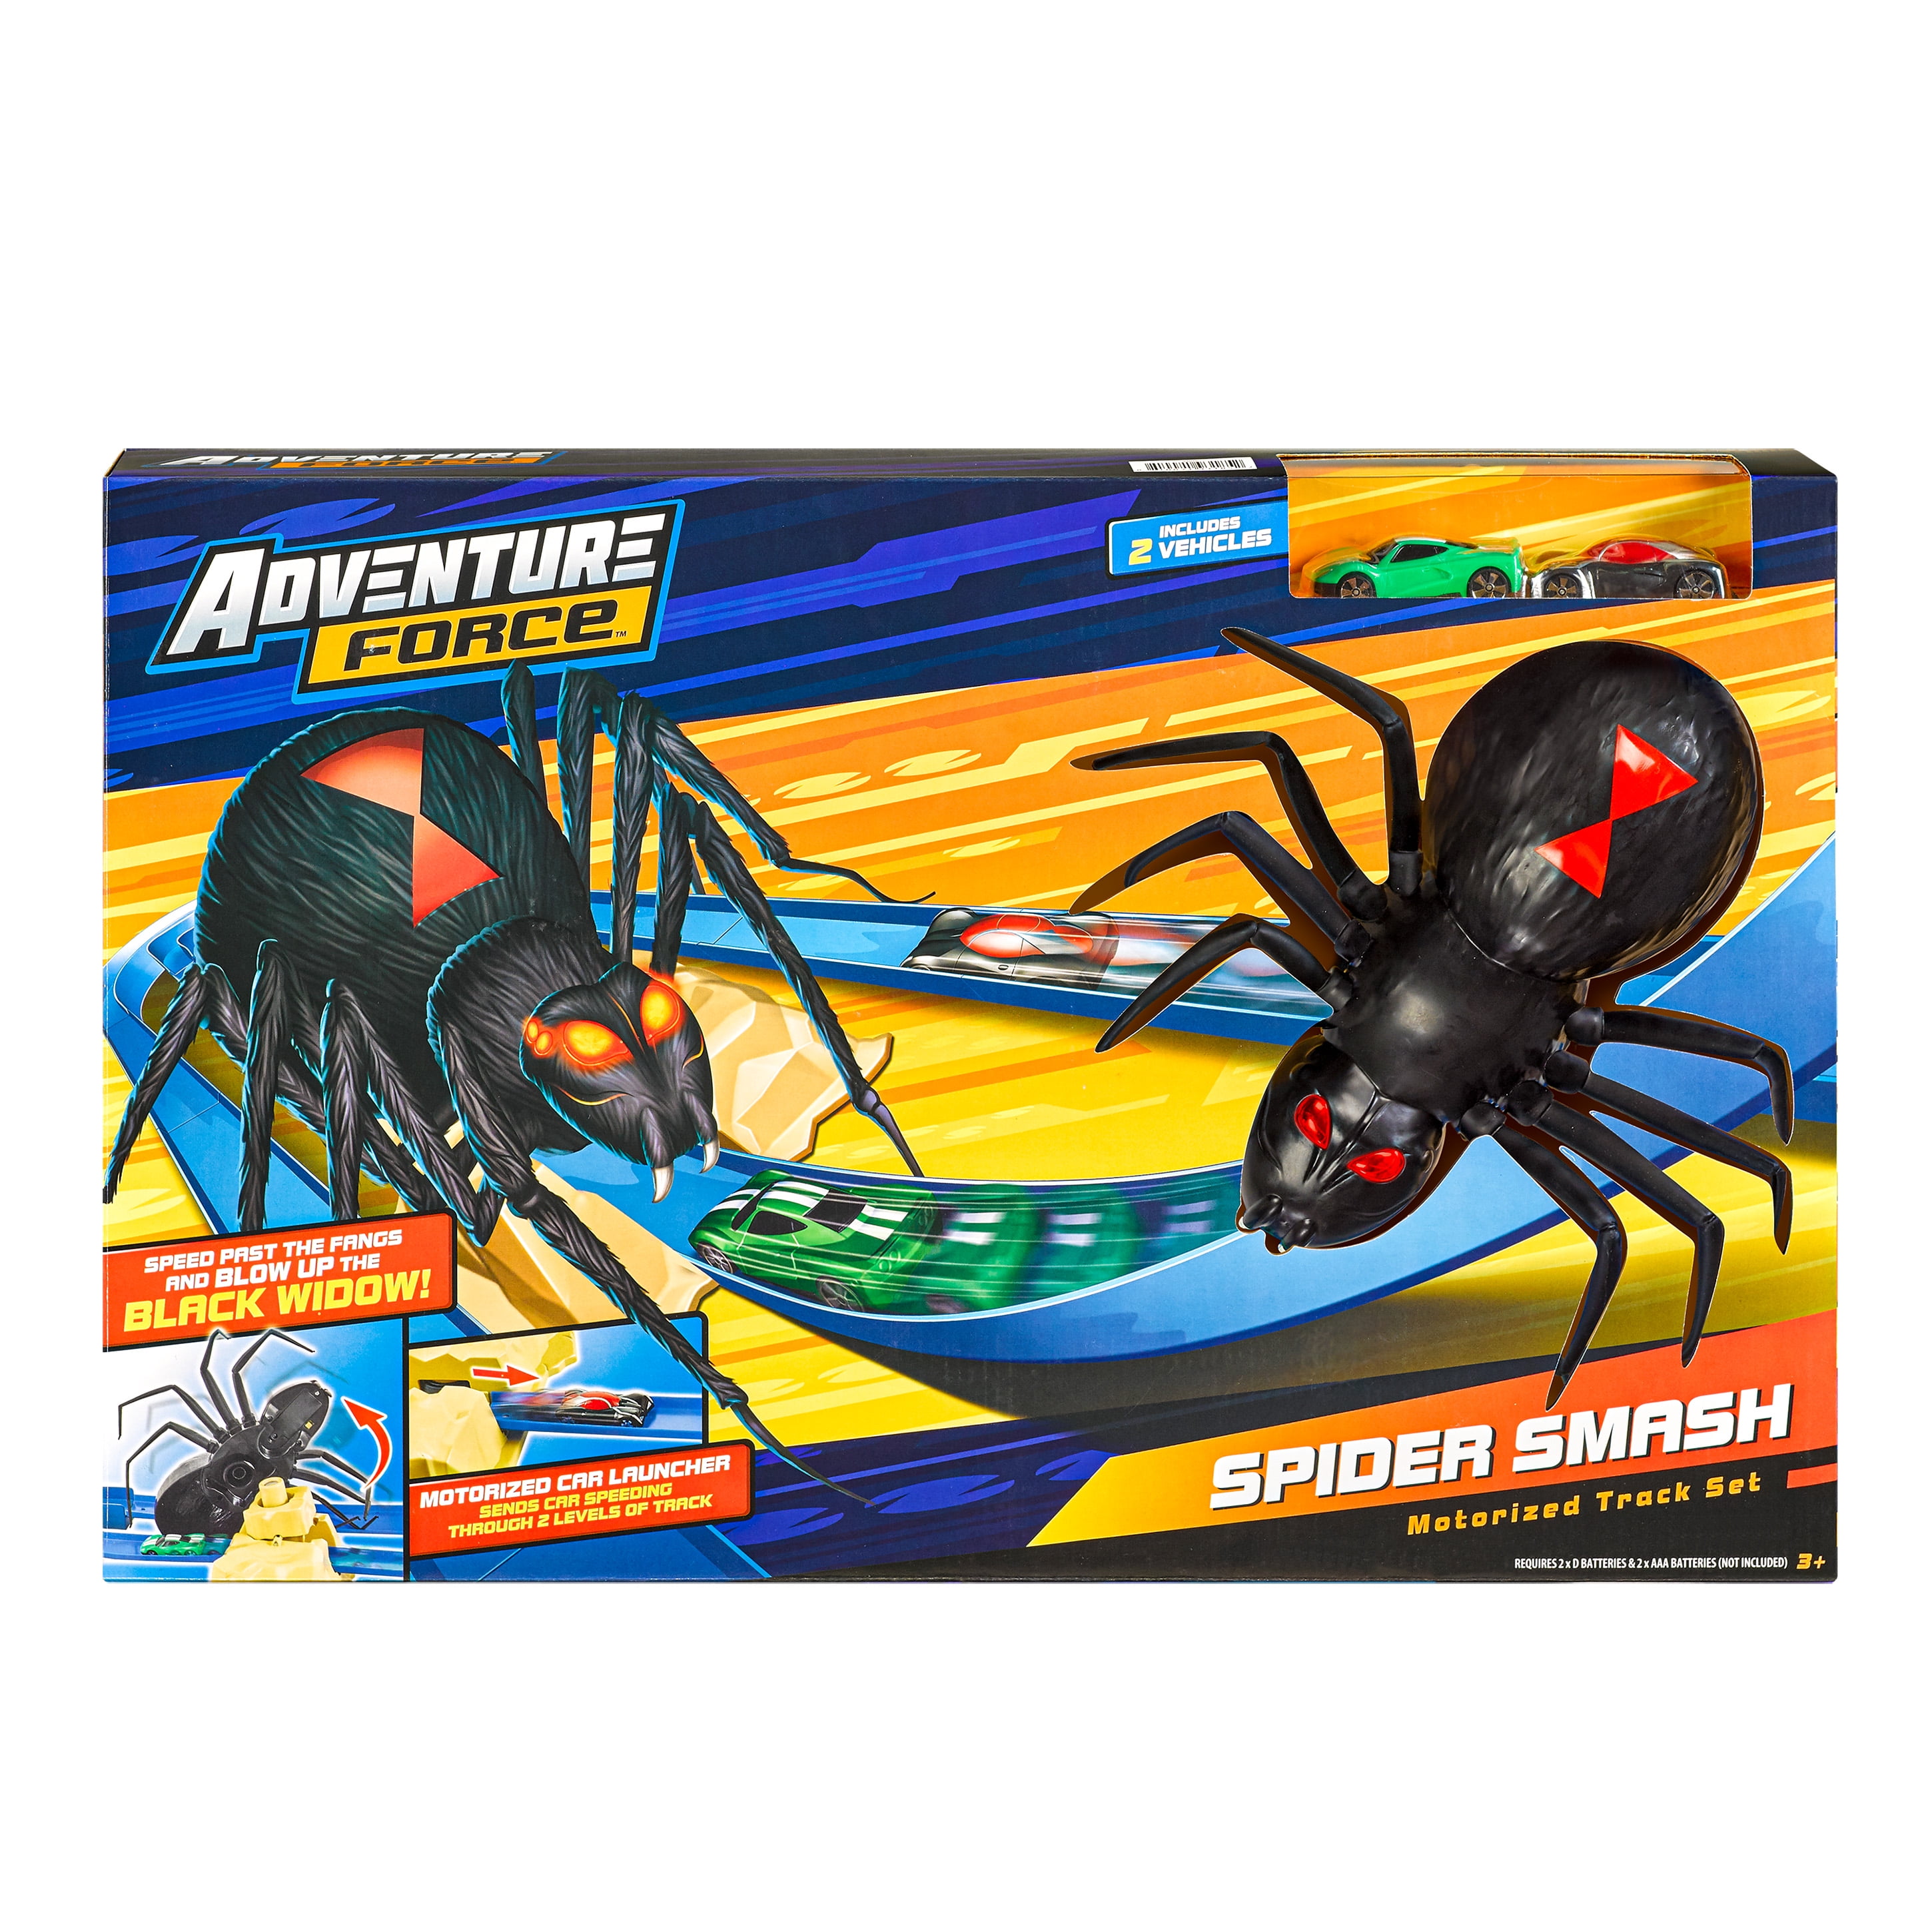 Adventure Force Spider Smash Motorized Race Track Car Vehicle Playset (28 Pieces)